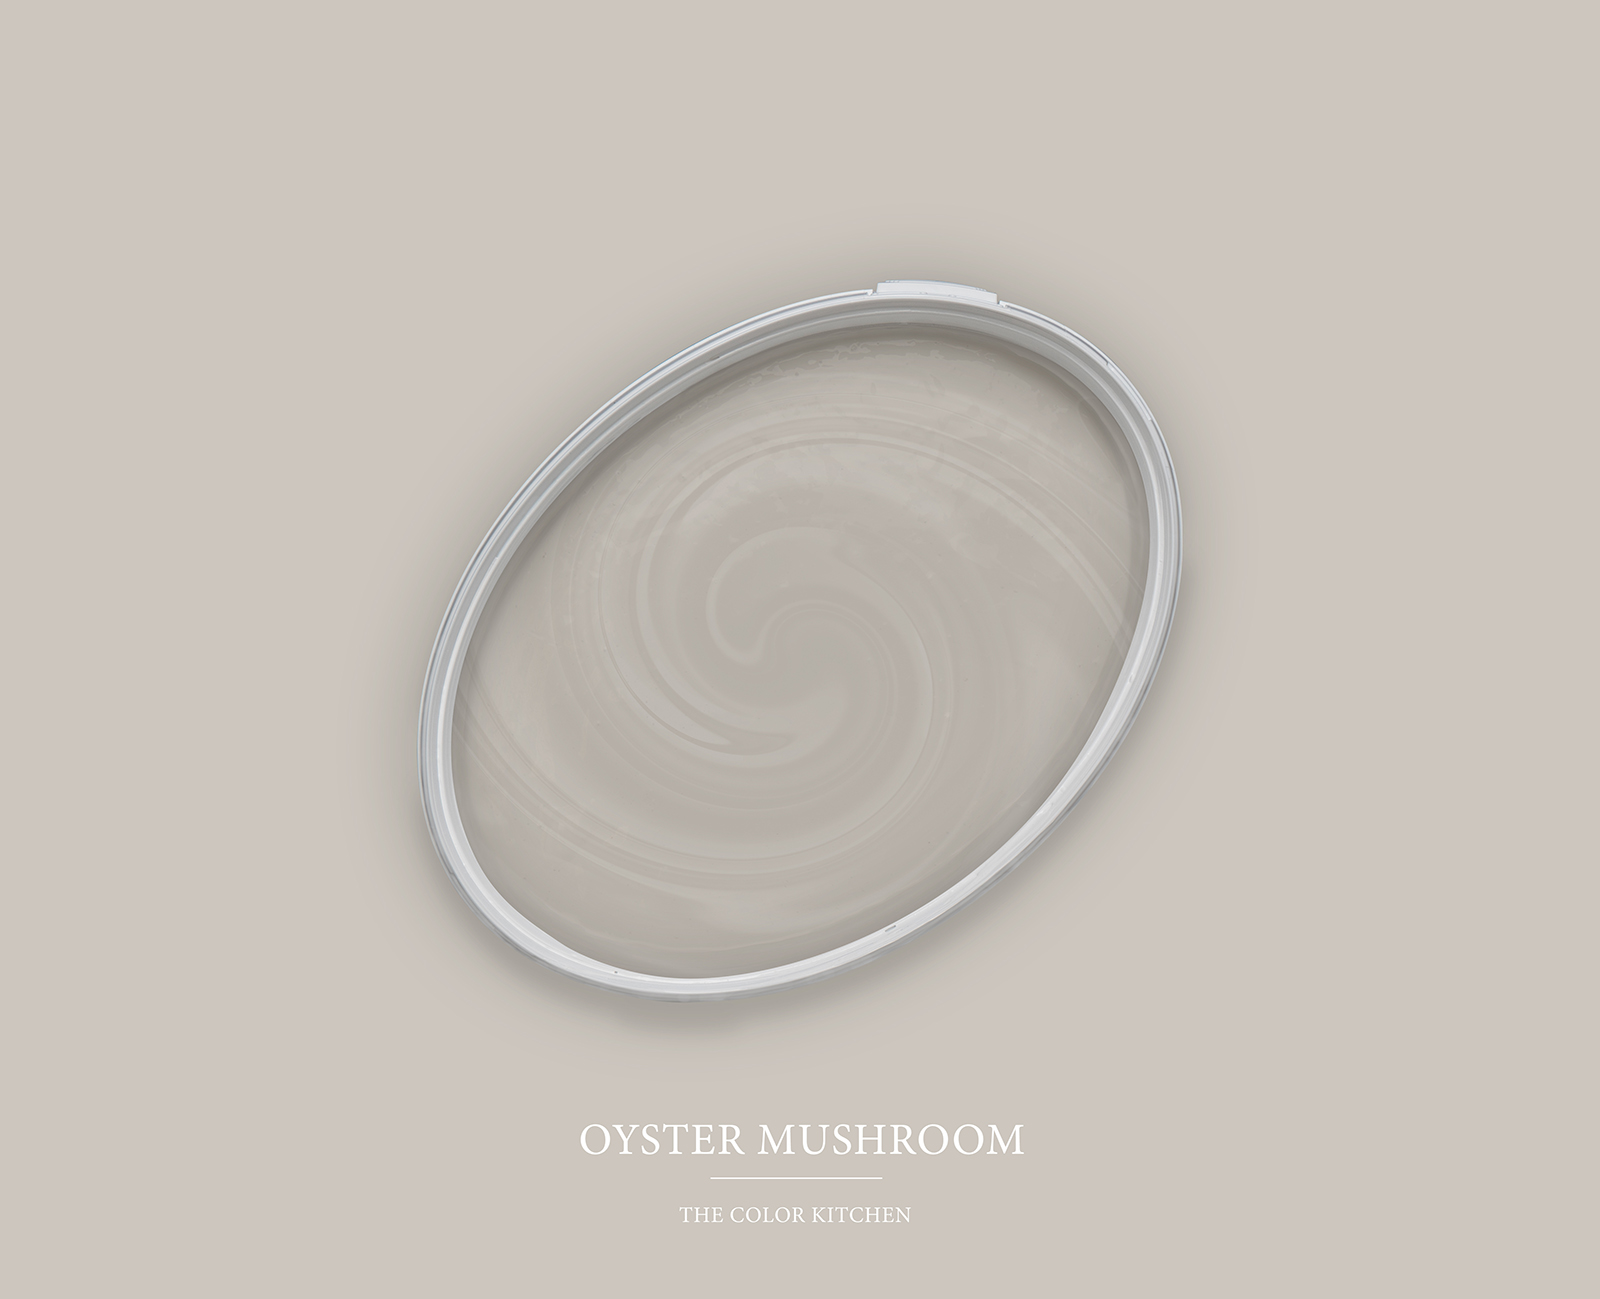         Wall Paint TCK1017 »Oyster Mushroom« in light taupe – 2.5 litre
    